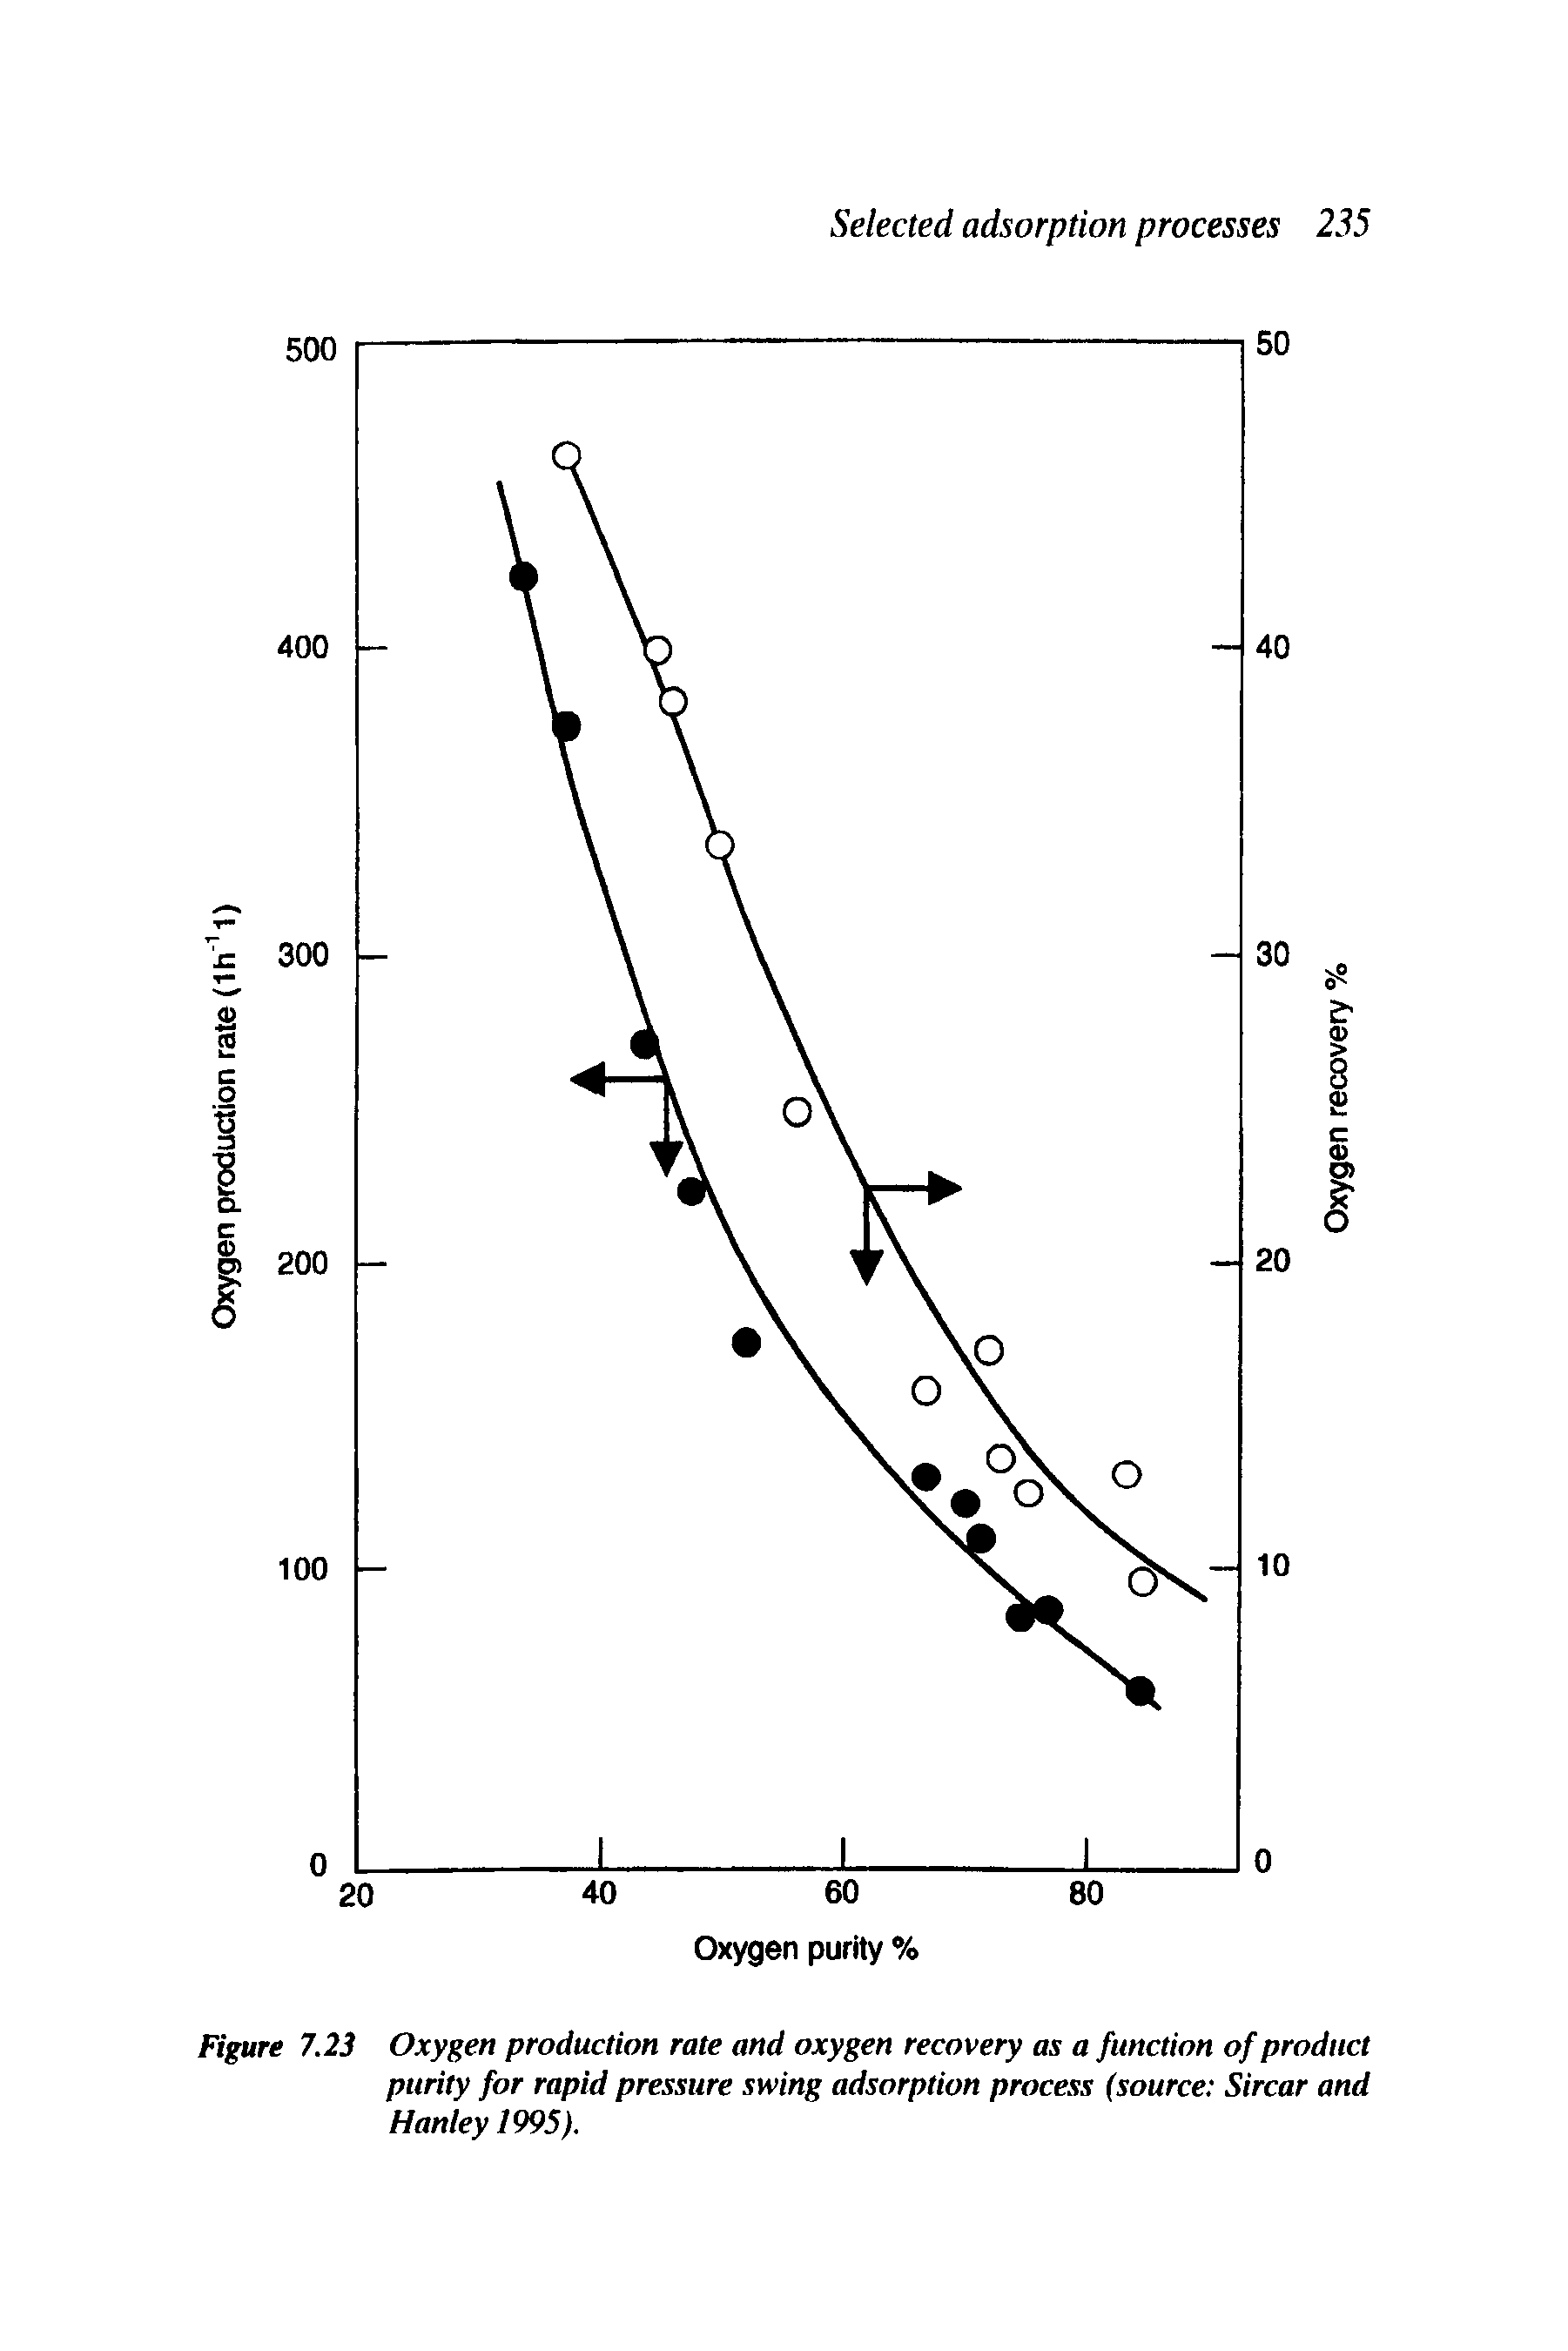 Figure 7.23 Oxygen production rate and oxygen recovery as a function of product purity for rapid pressure swing adsorption process (source Sircar and Hanley 1995).